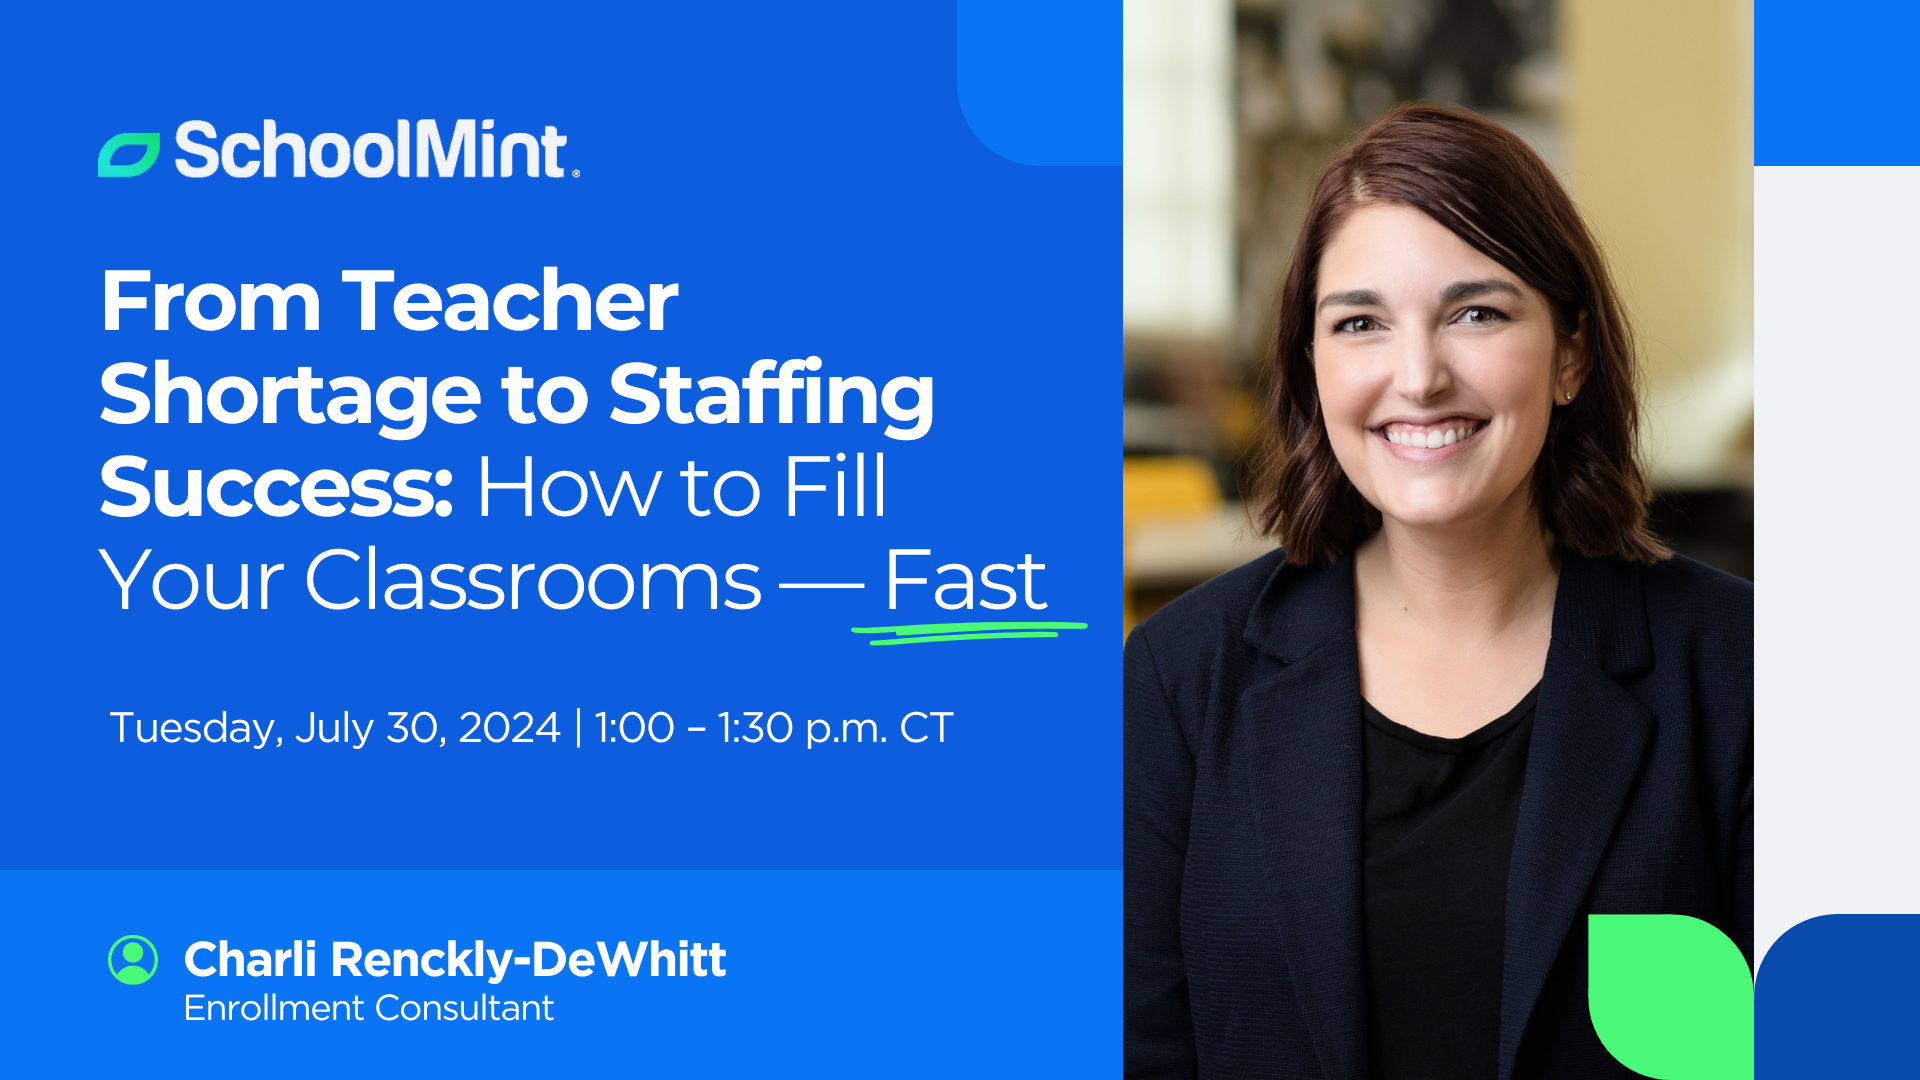 From Teacher Shortage to Staffing Success - How to Fill Your Classrooms Fast - webinar 7